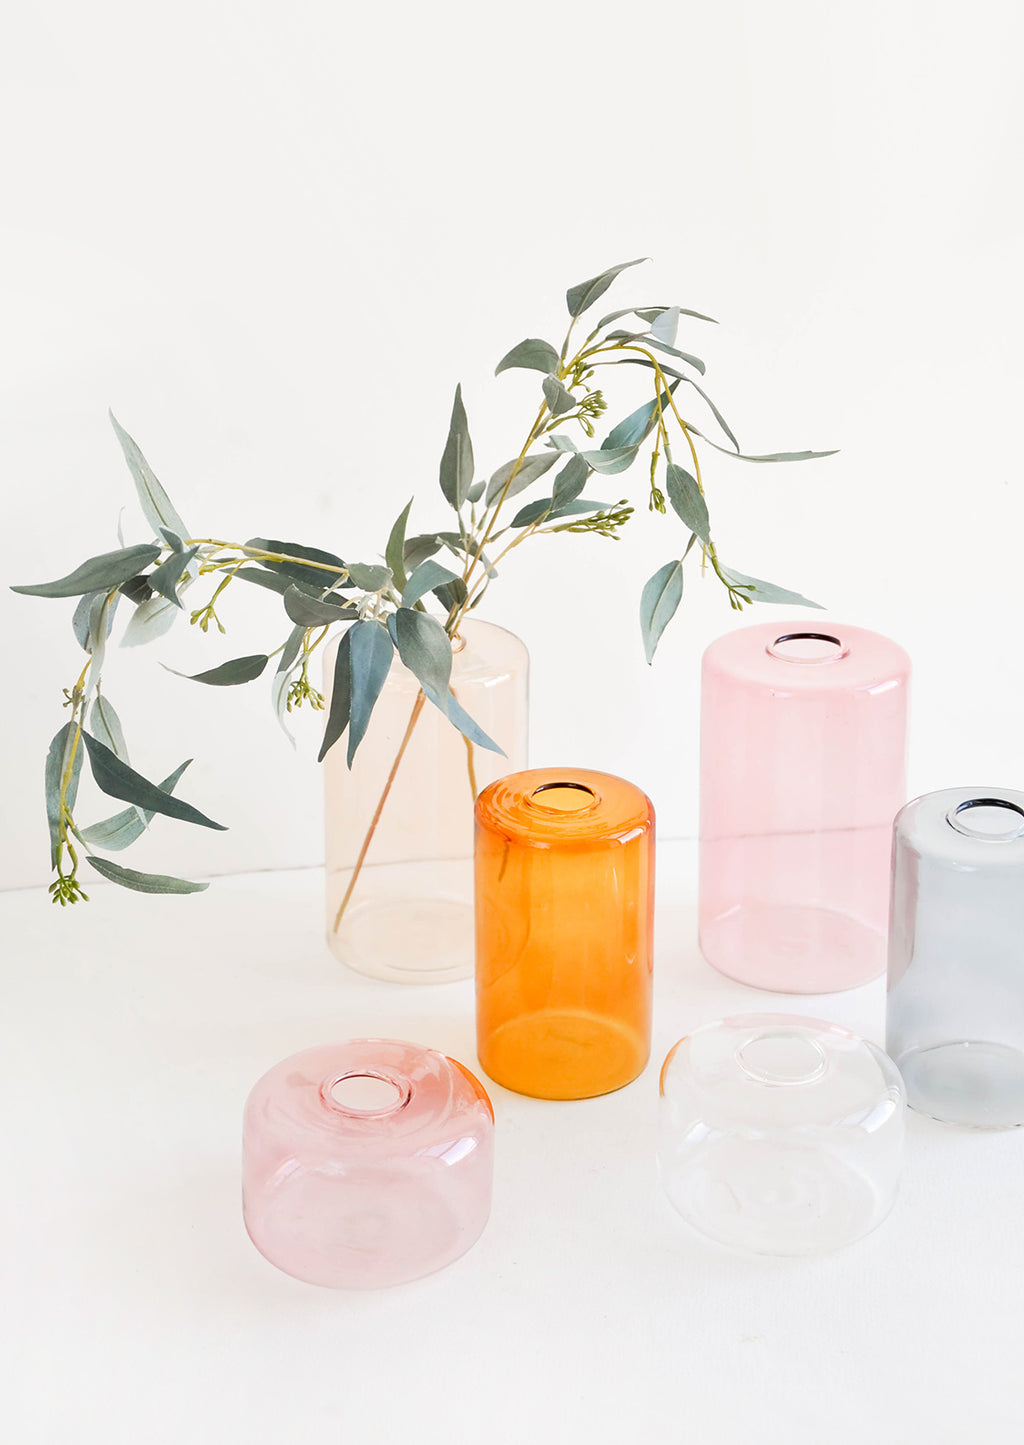 1: Multiple clear colored glass vases in a variety of colors, displayed with eucalyptus branch